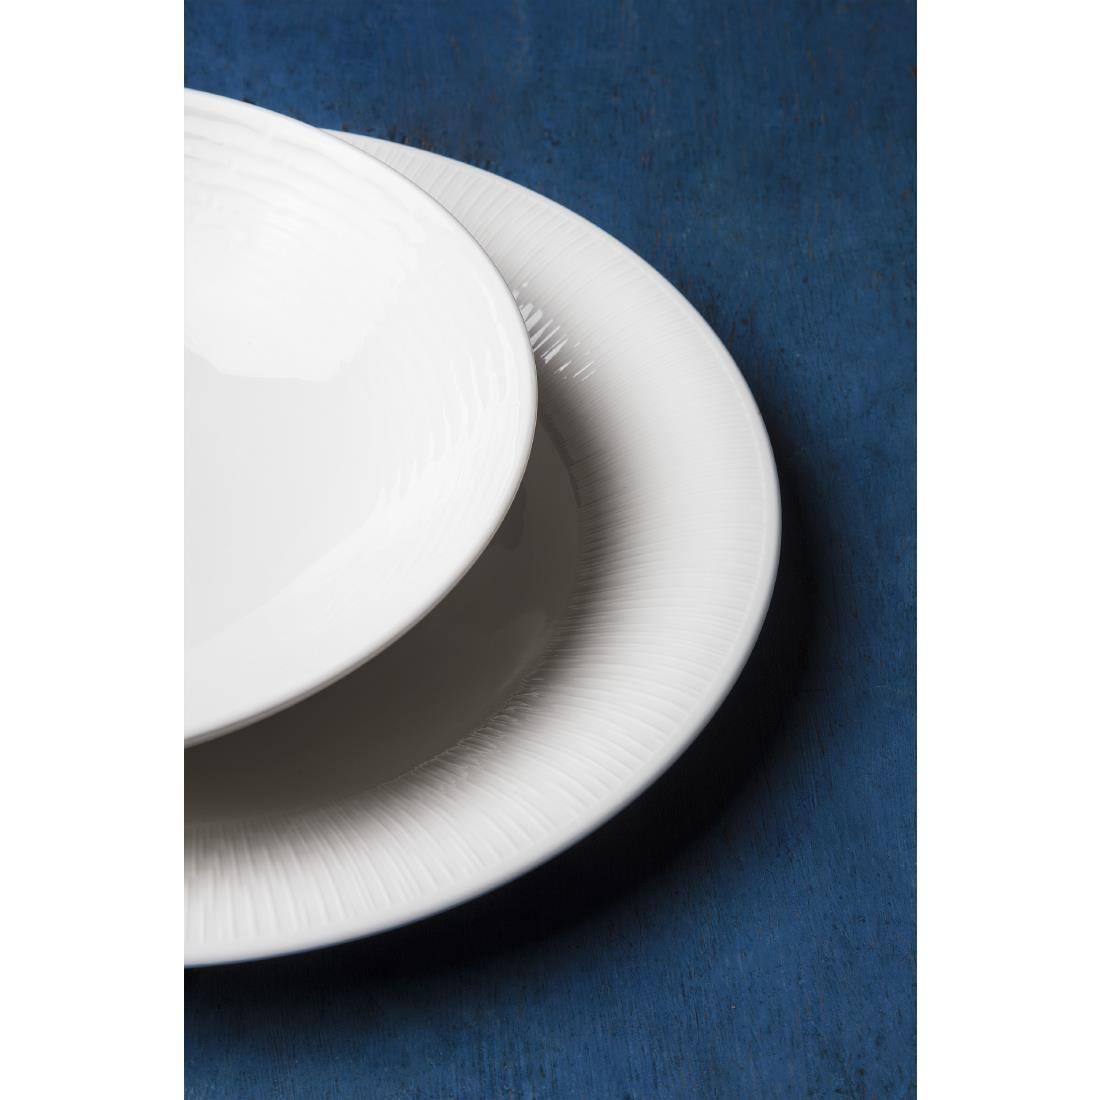 Royal Porcelain Maxadura Solario Plate 230mm (Pack of 12) - GT914  - 4